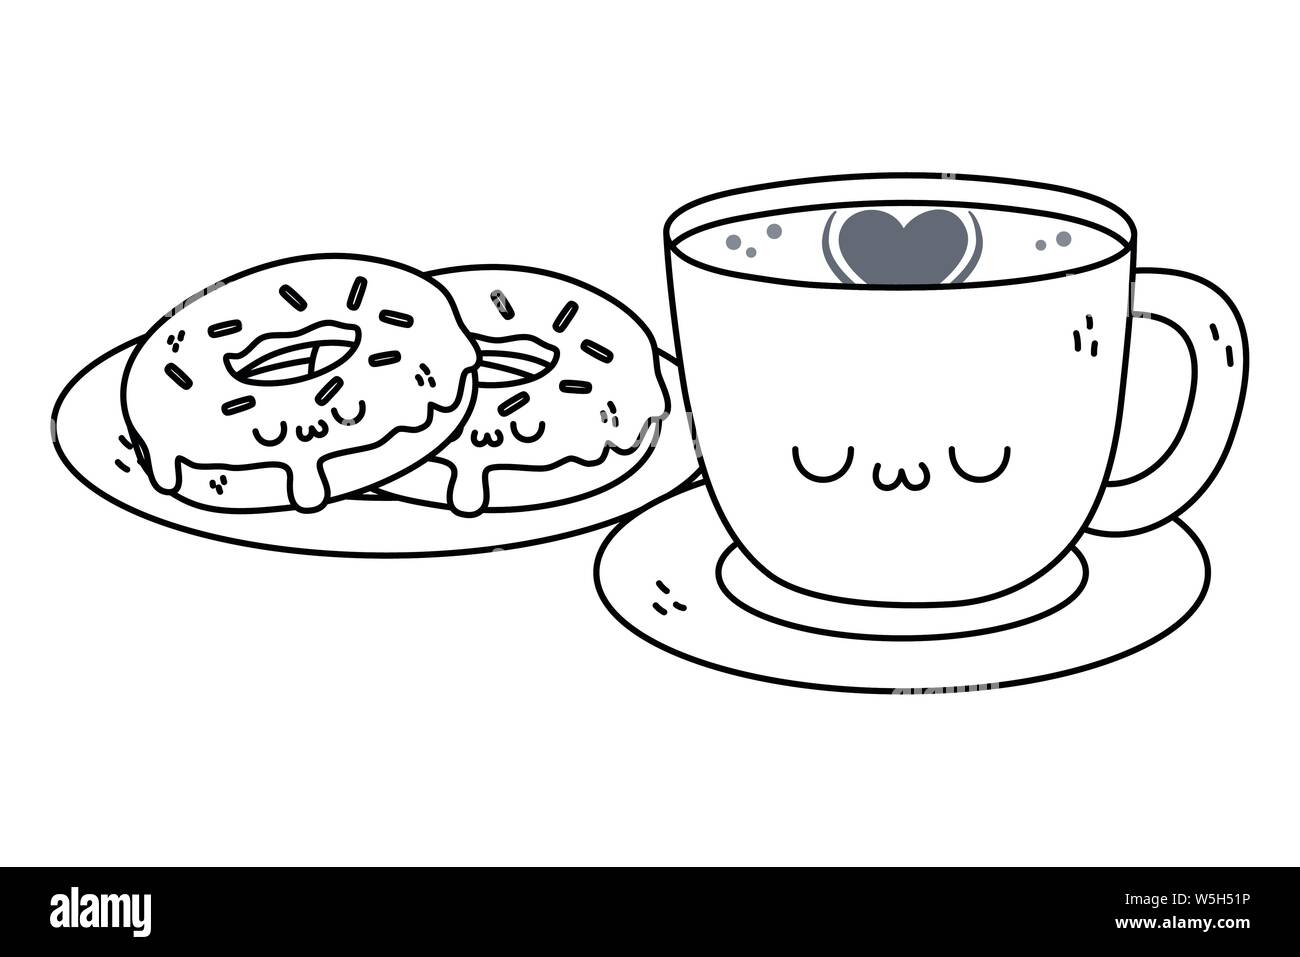 https://c8.alamy.com/comp/W5H51P/coffee-cup-cartoon-design-kawaii-expression-cute-character-funny-and-emoticon-theme-vector-illustration-W5H51P.jpg